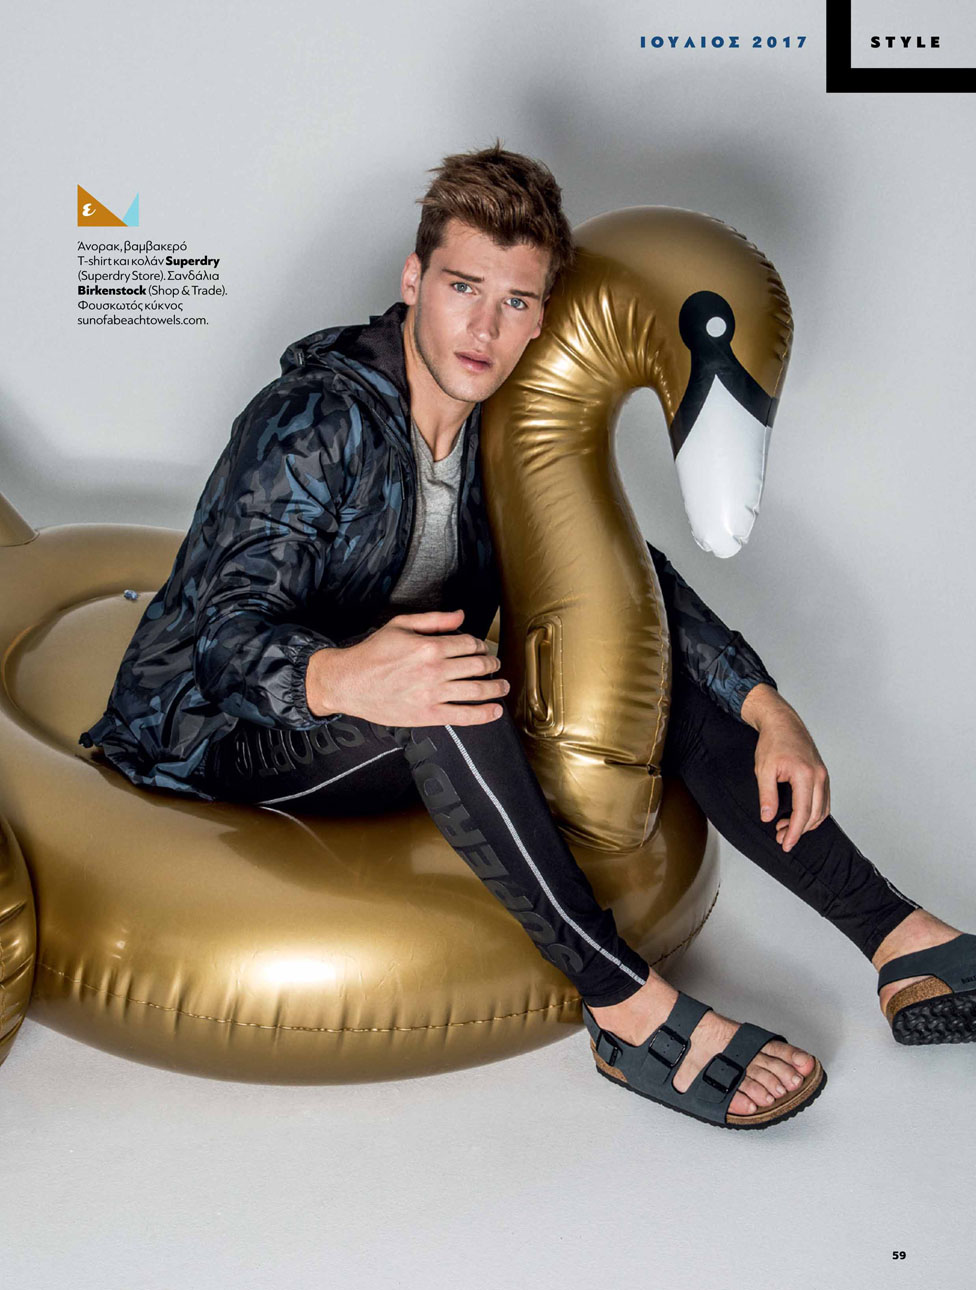 Diving into the style with Ilias for Esquire.